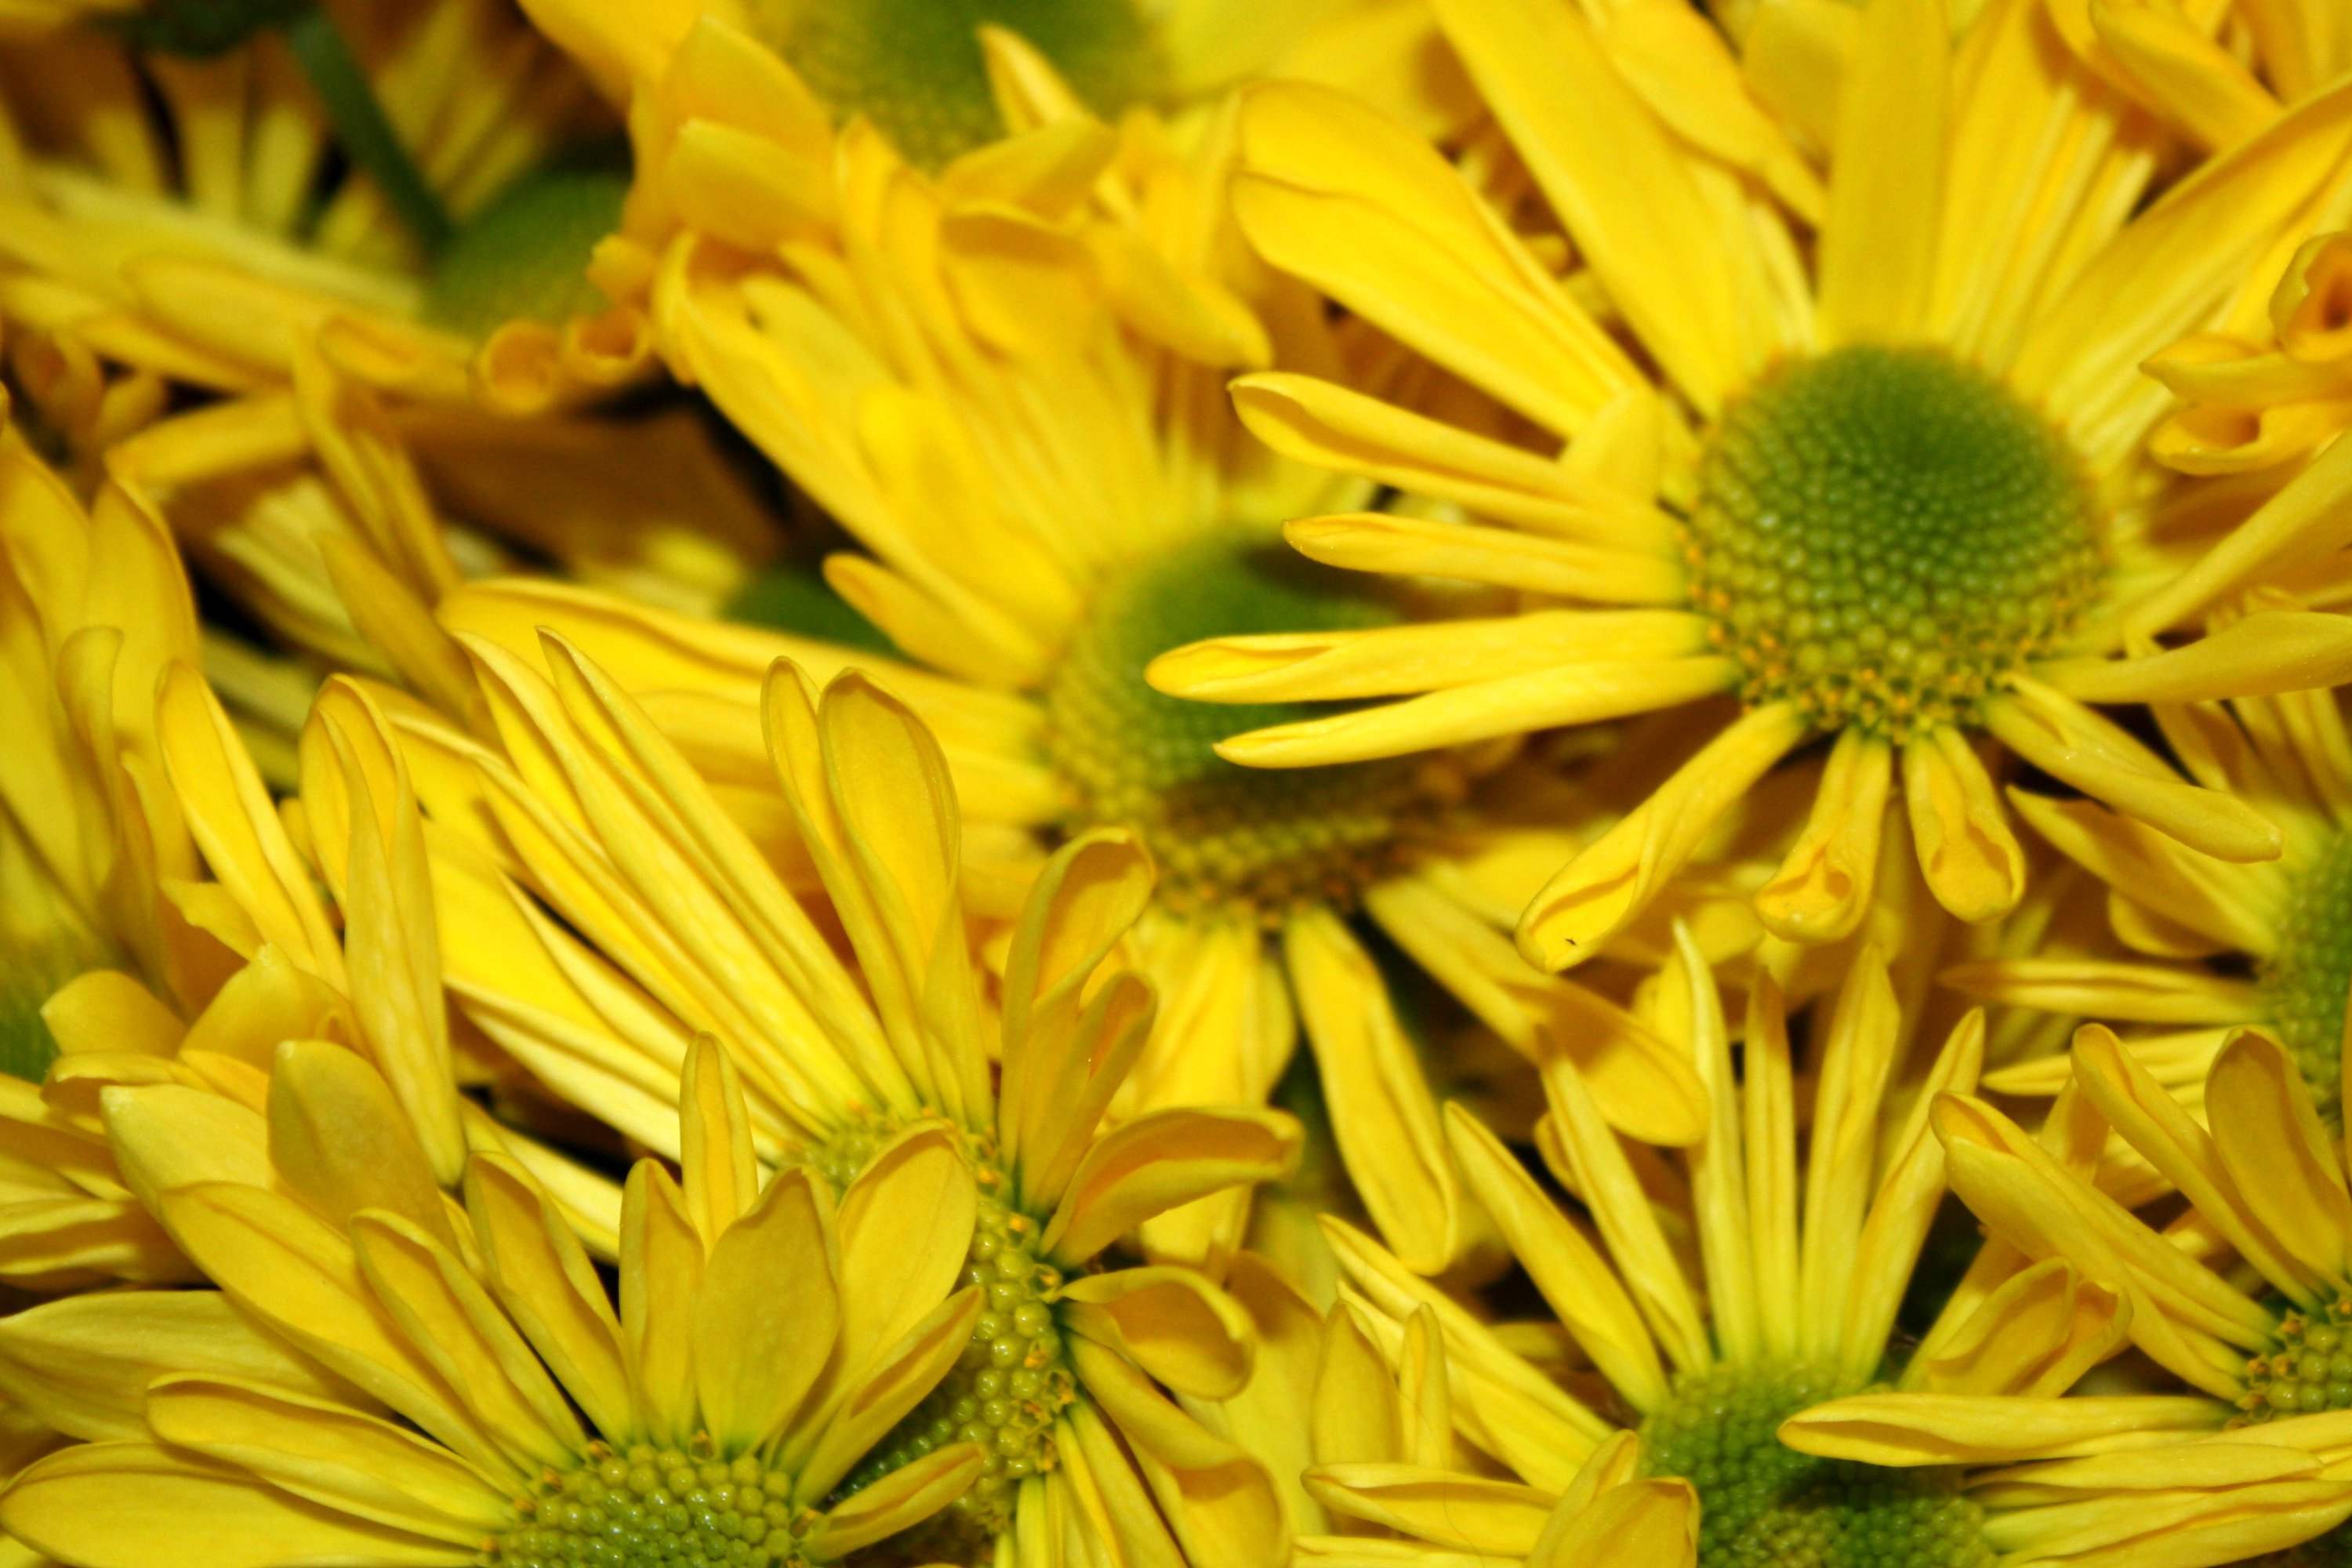 Yellow Daisies Close Up Texture Picture | Free Photograph | Photos ...